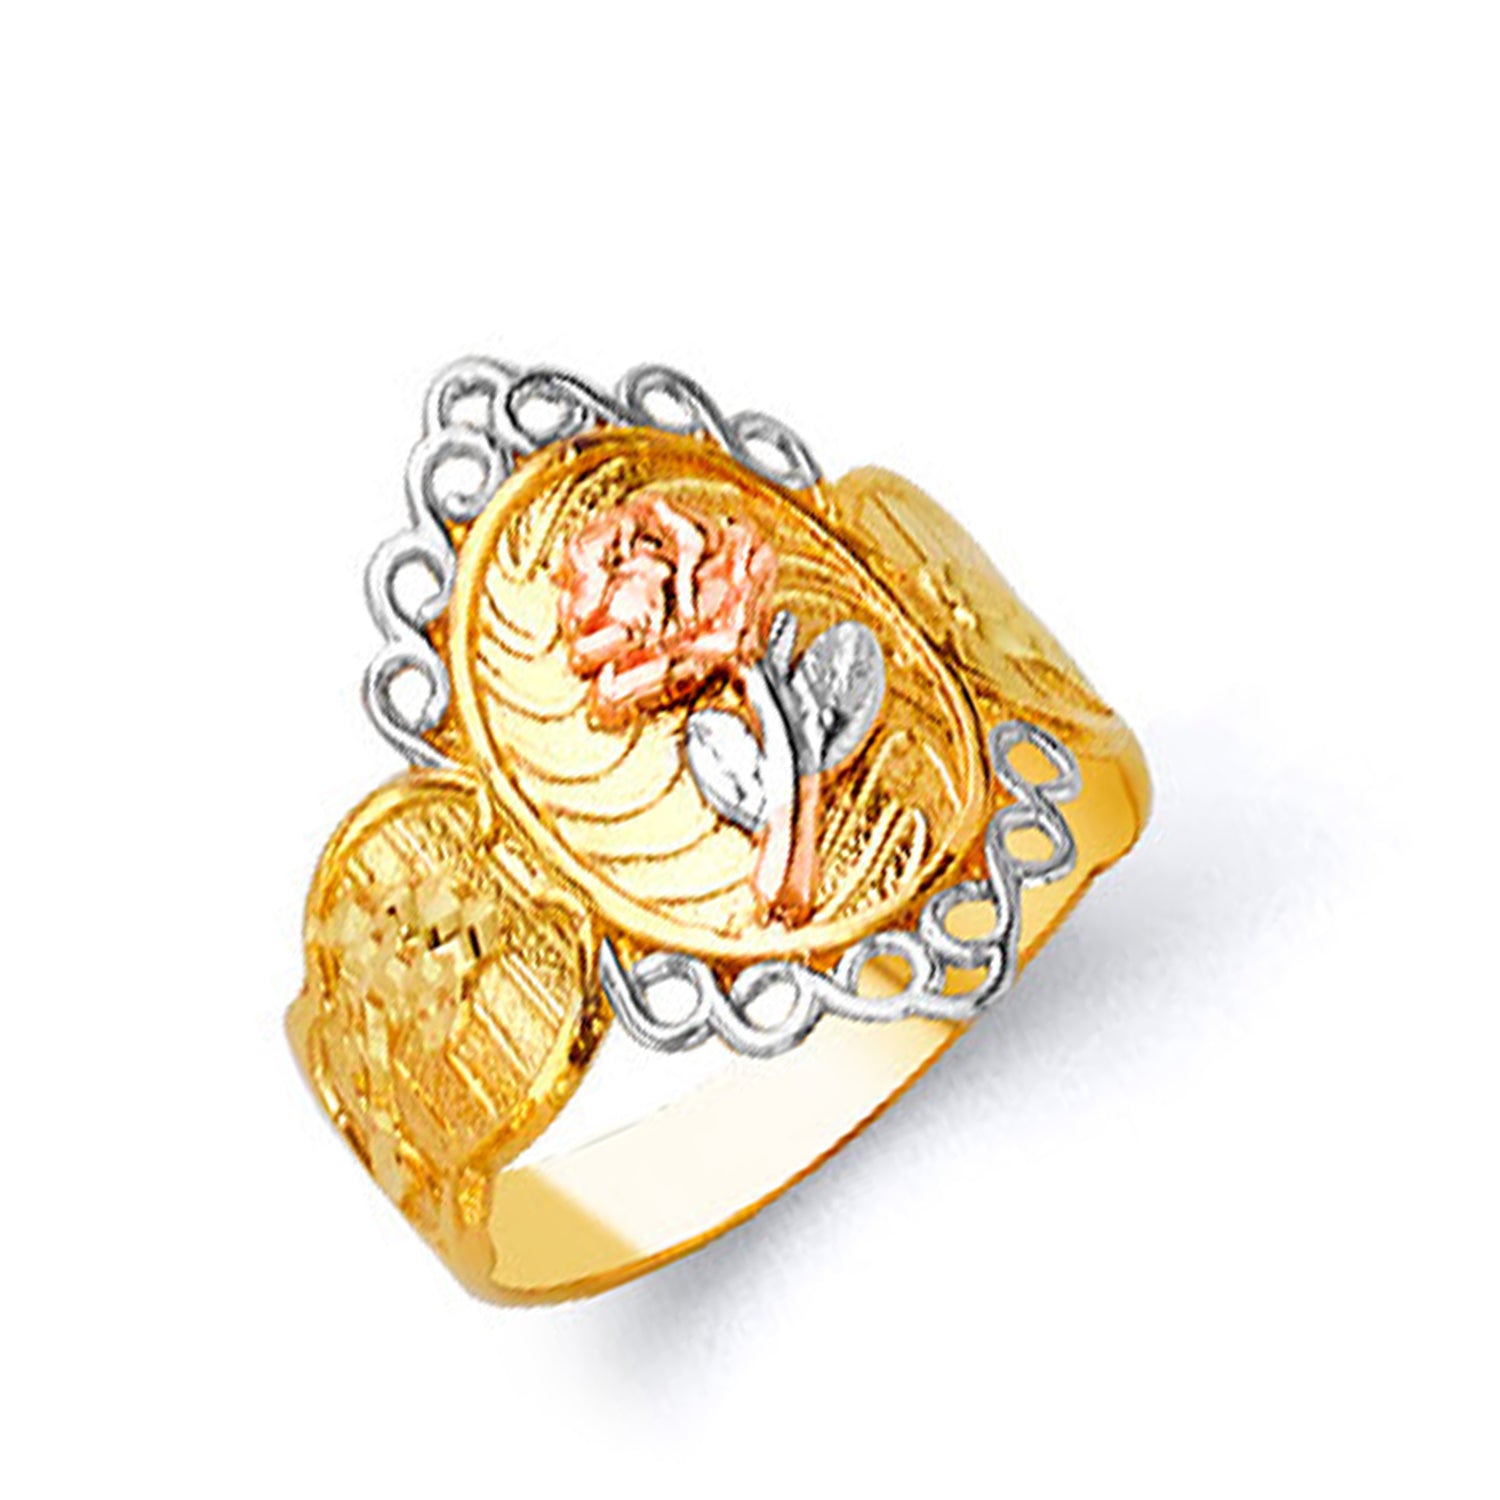 Monarchical Casted Rose Motif Ring in Solid Gold 